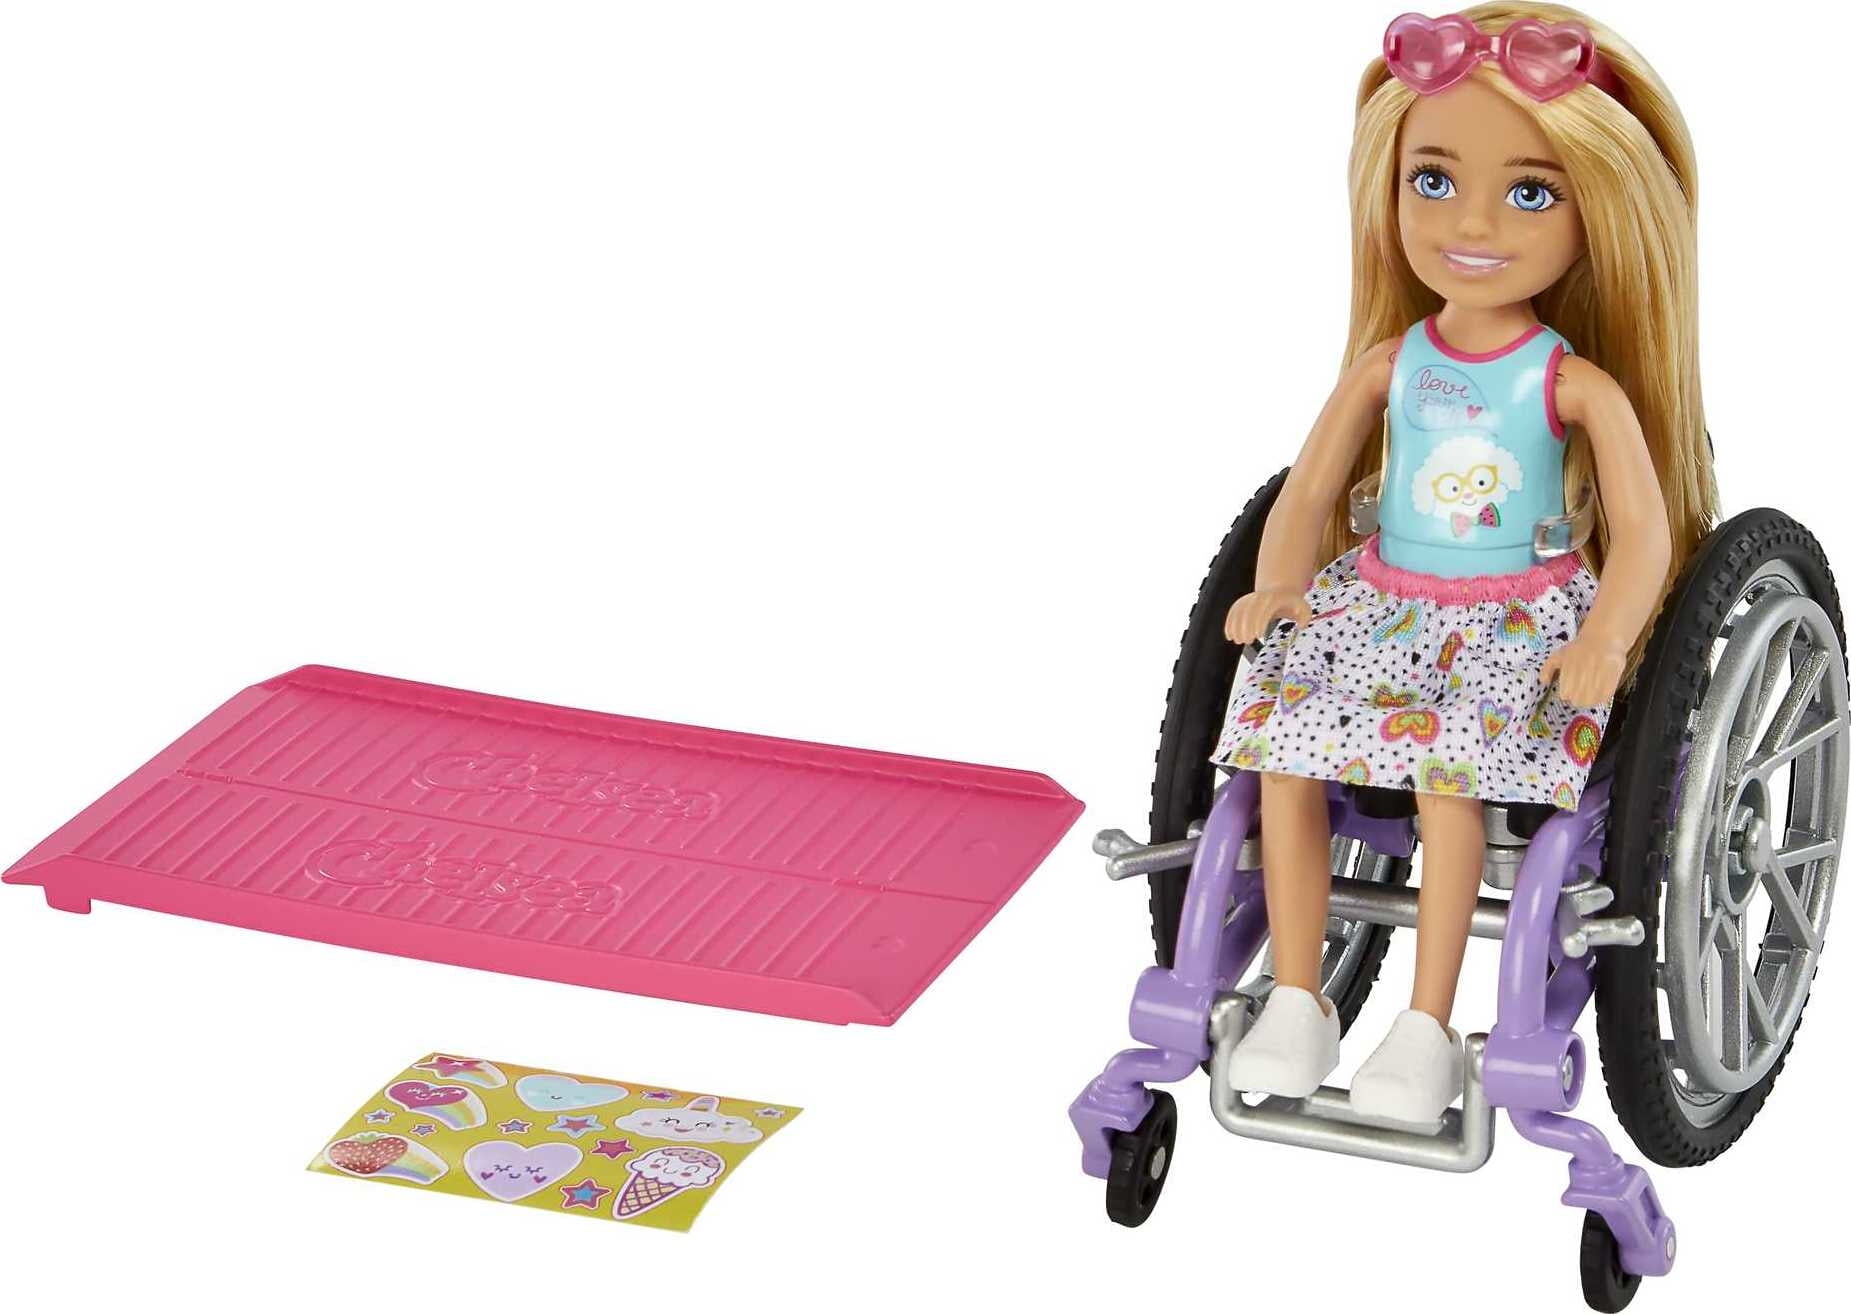 Barbie Doll & Wheelchair Ramp, Stickers & Accessories, Small Doll with Blonde Hair - Walmart.com